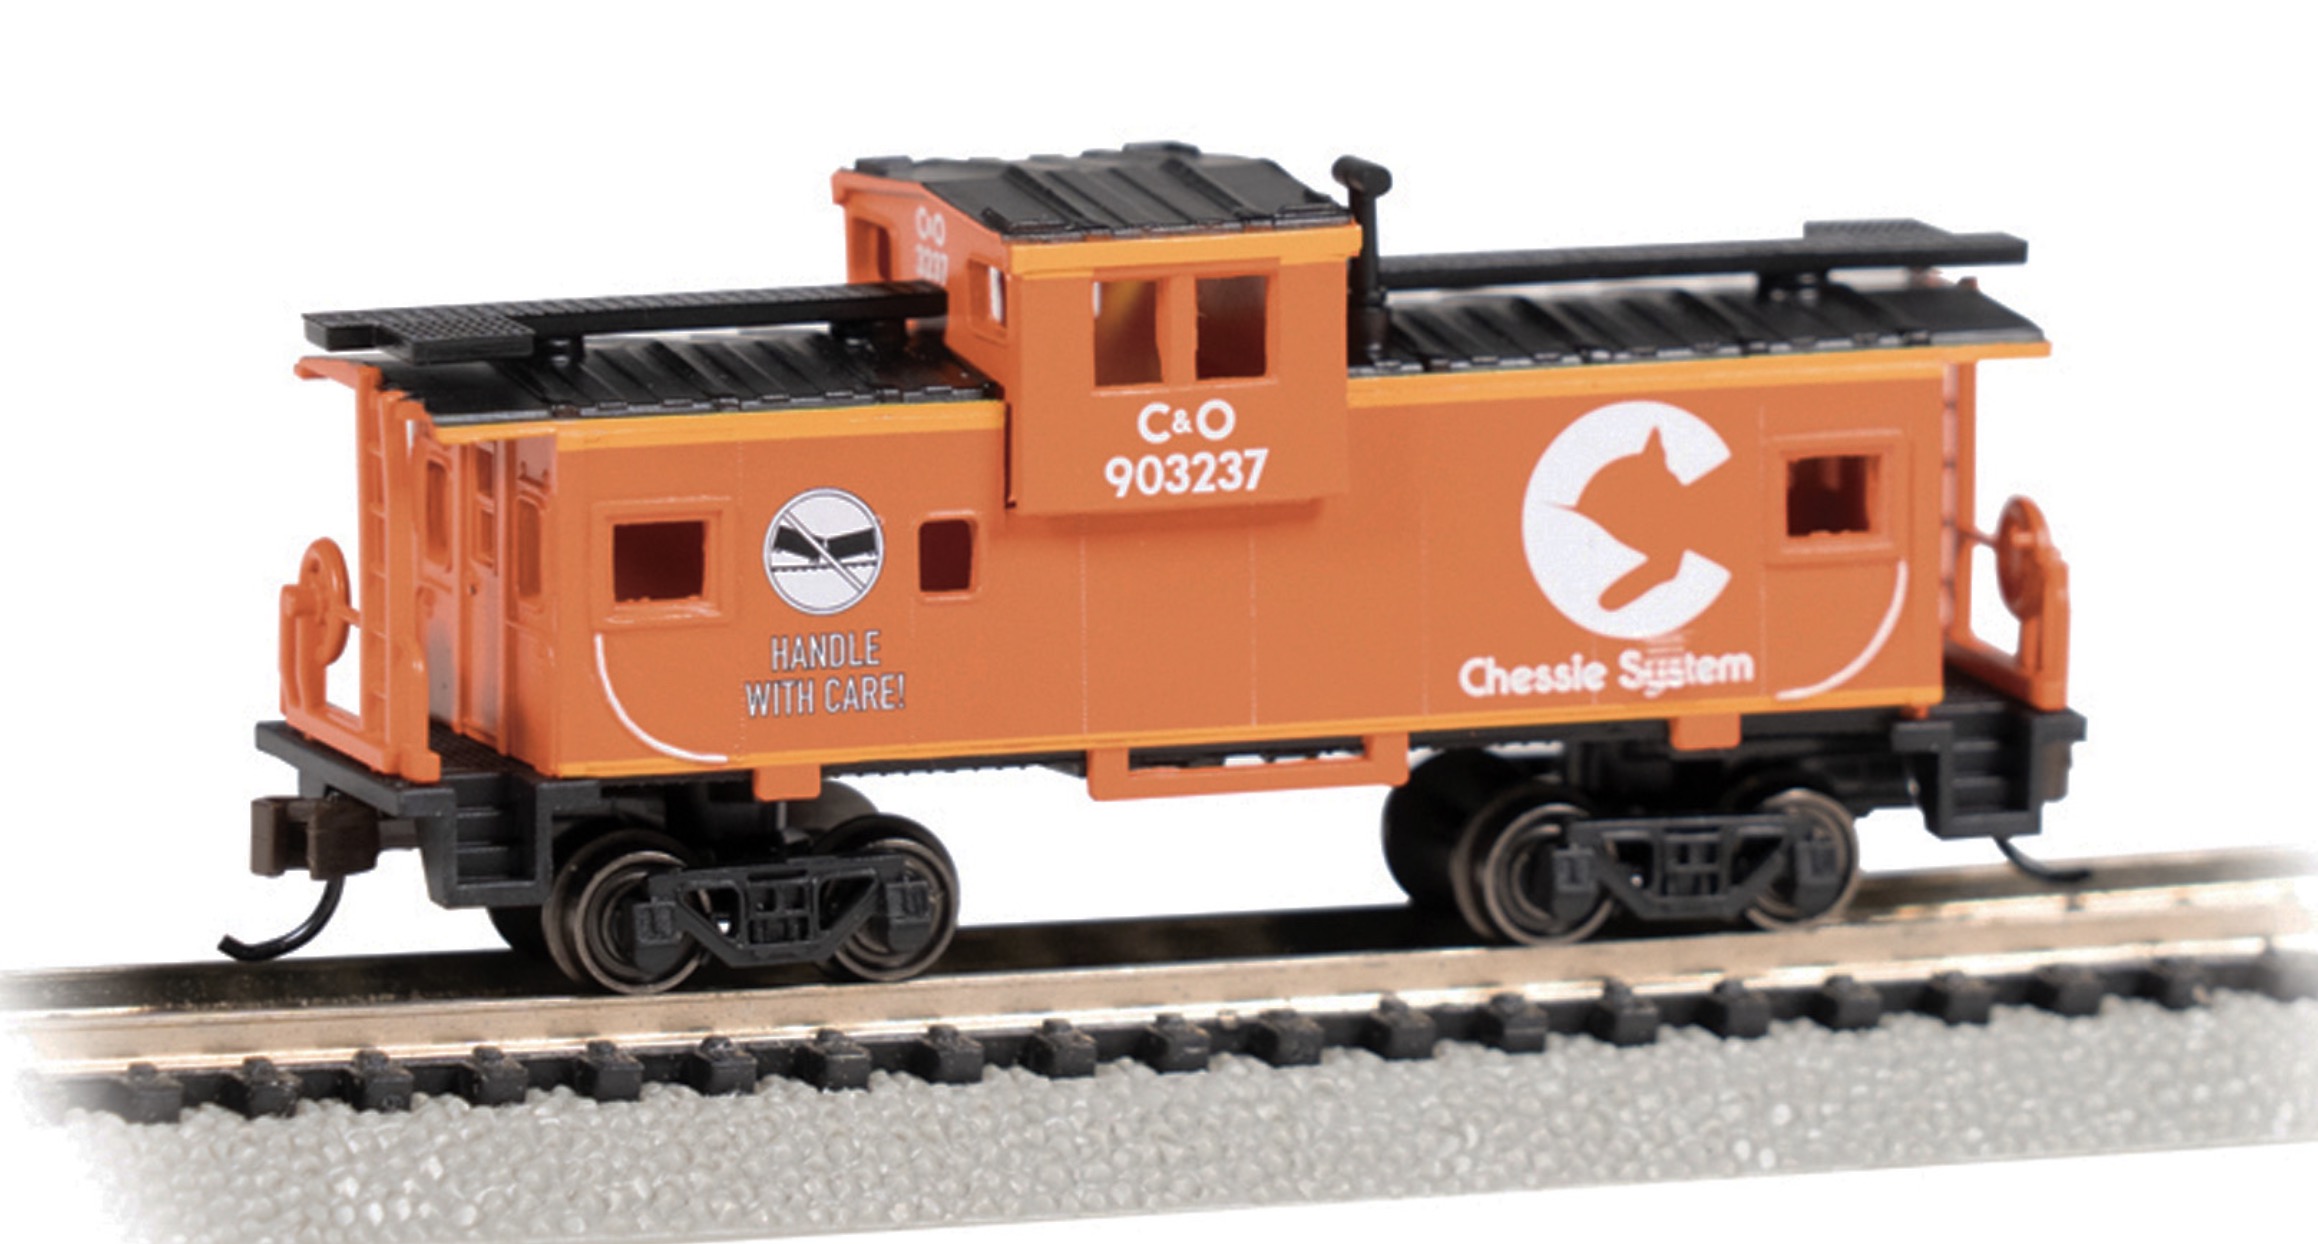 N Scale - Bachmann - 70758 - Caboose, Cupola, Steel Extended Vision - Chessie System - 903237